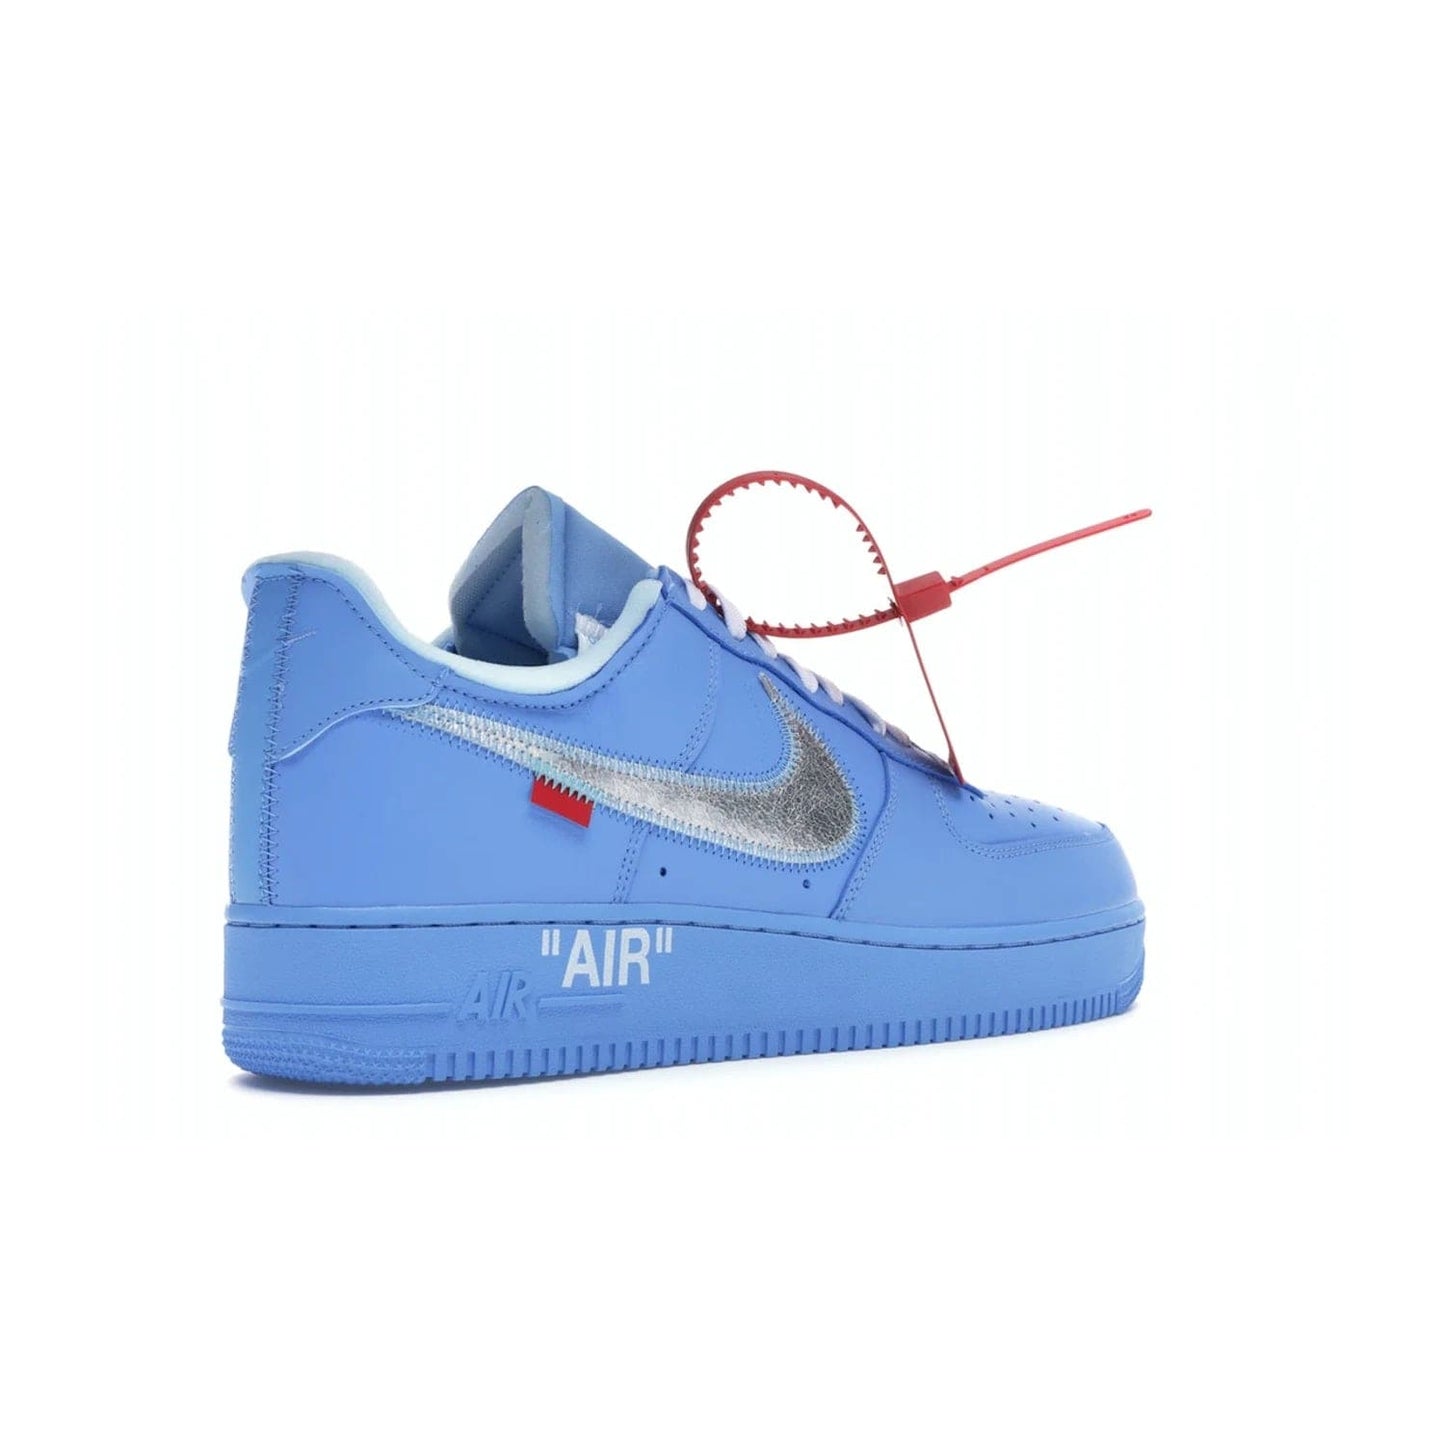 Nike Air Force 1 Low Off-White MCA University Blue - Image 33 - Only at www.BallersClubKickz.com - Virgil Abloh's Air Force 1 Low Off-White MCA University Blue: Features University Blue leather and midsole, reflective silver Nike Swoosh, red zip tie, white laces, and iconic Off-White™ branding. A must-have for any Virgil Abloh enthusiast.